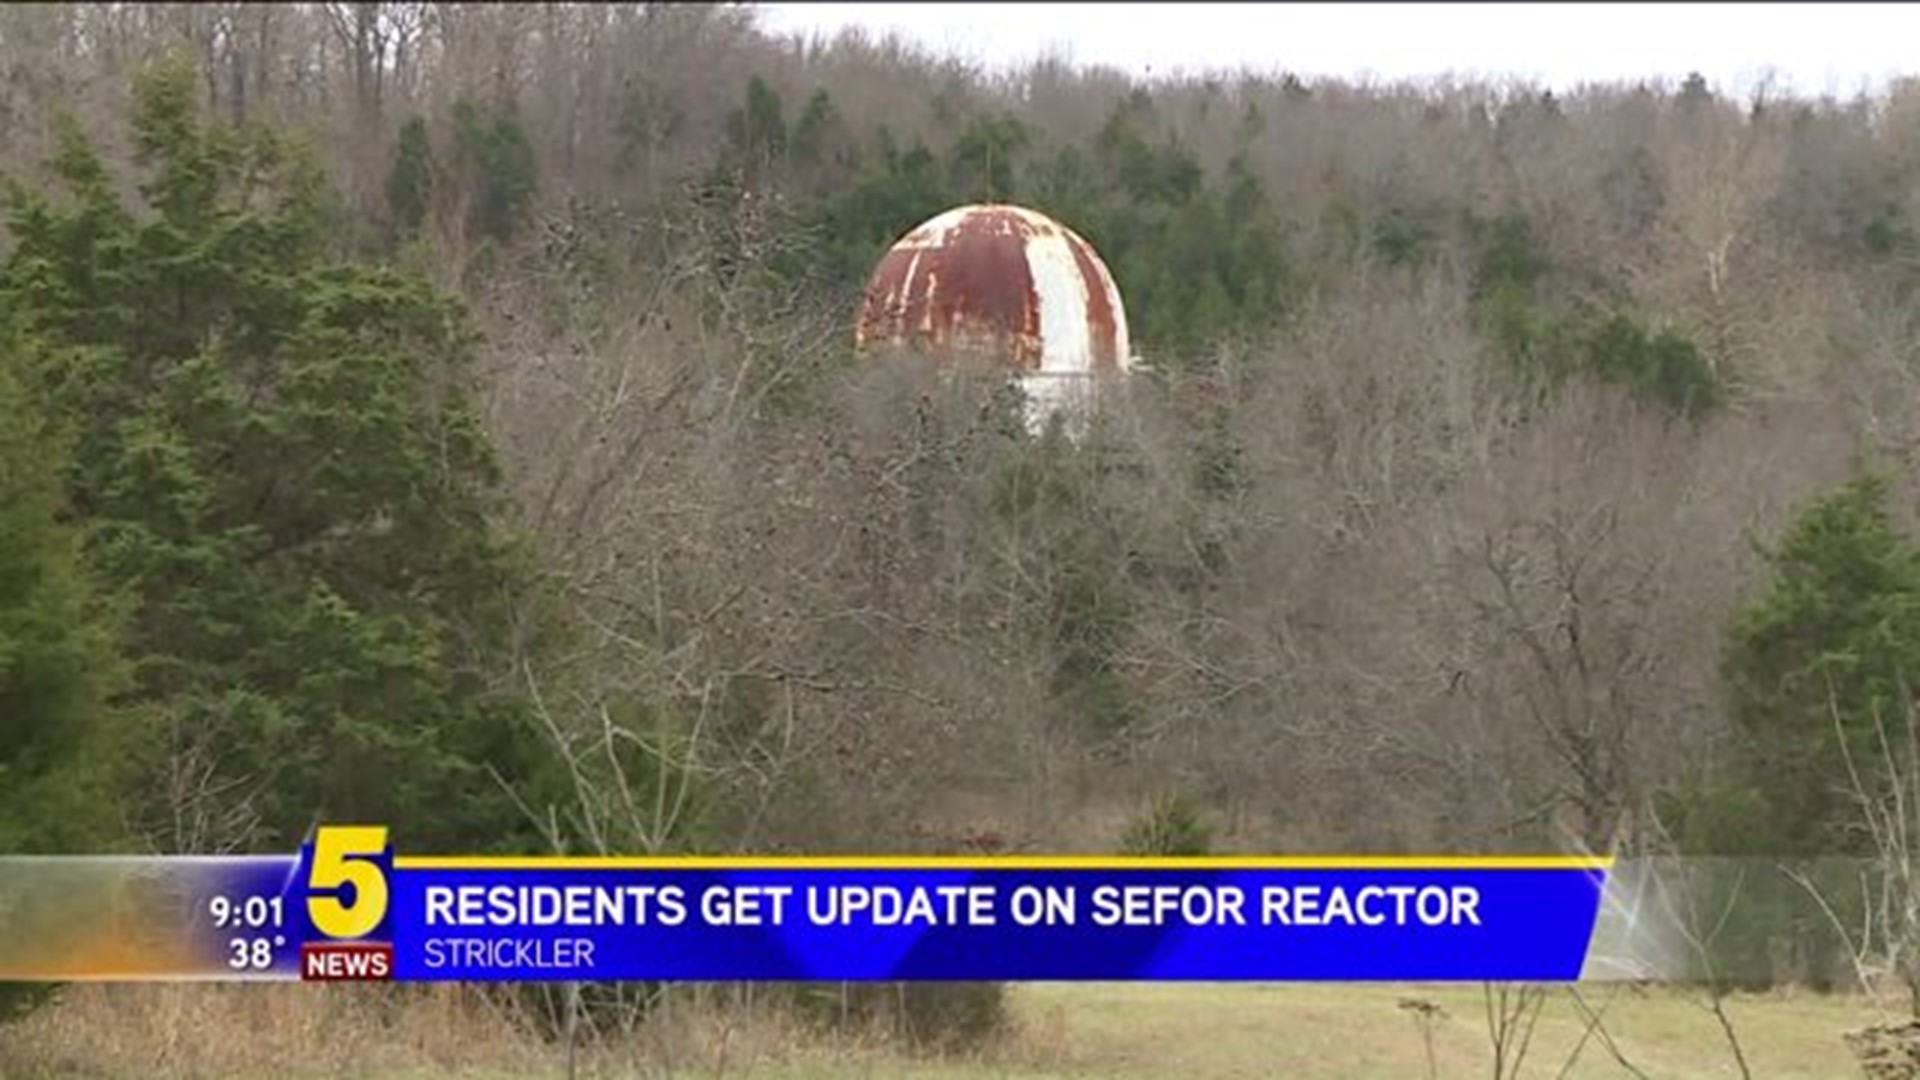 Residents Get Update On SEFOR Reactor